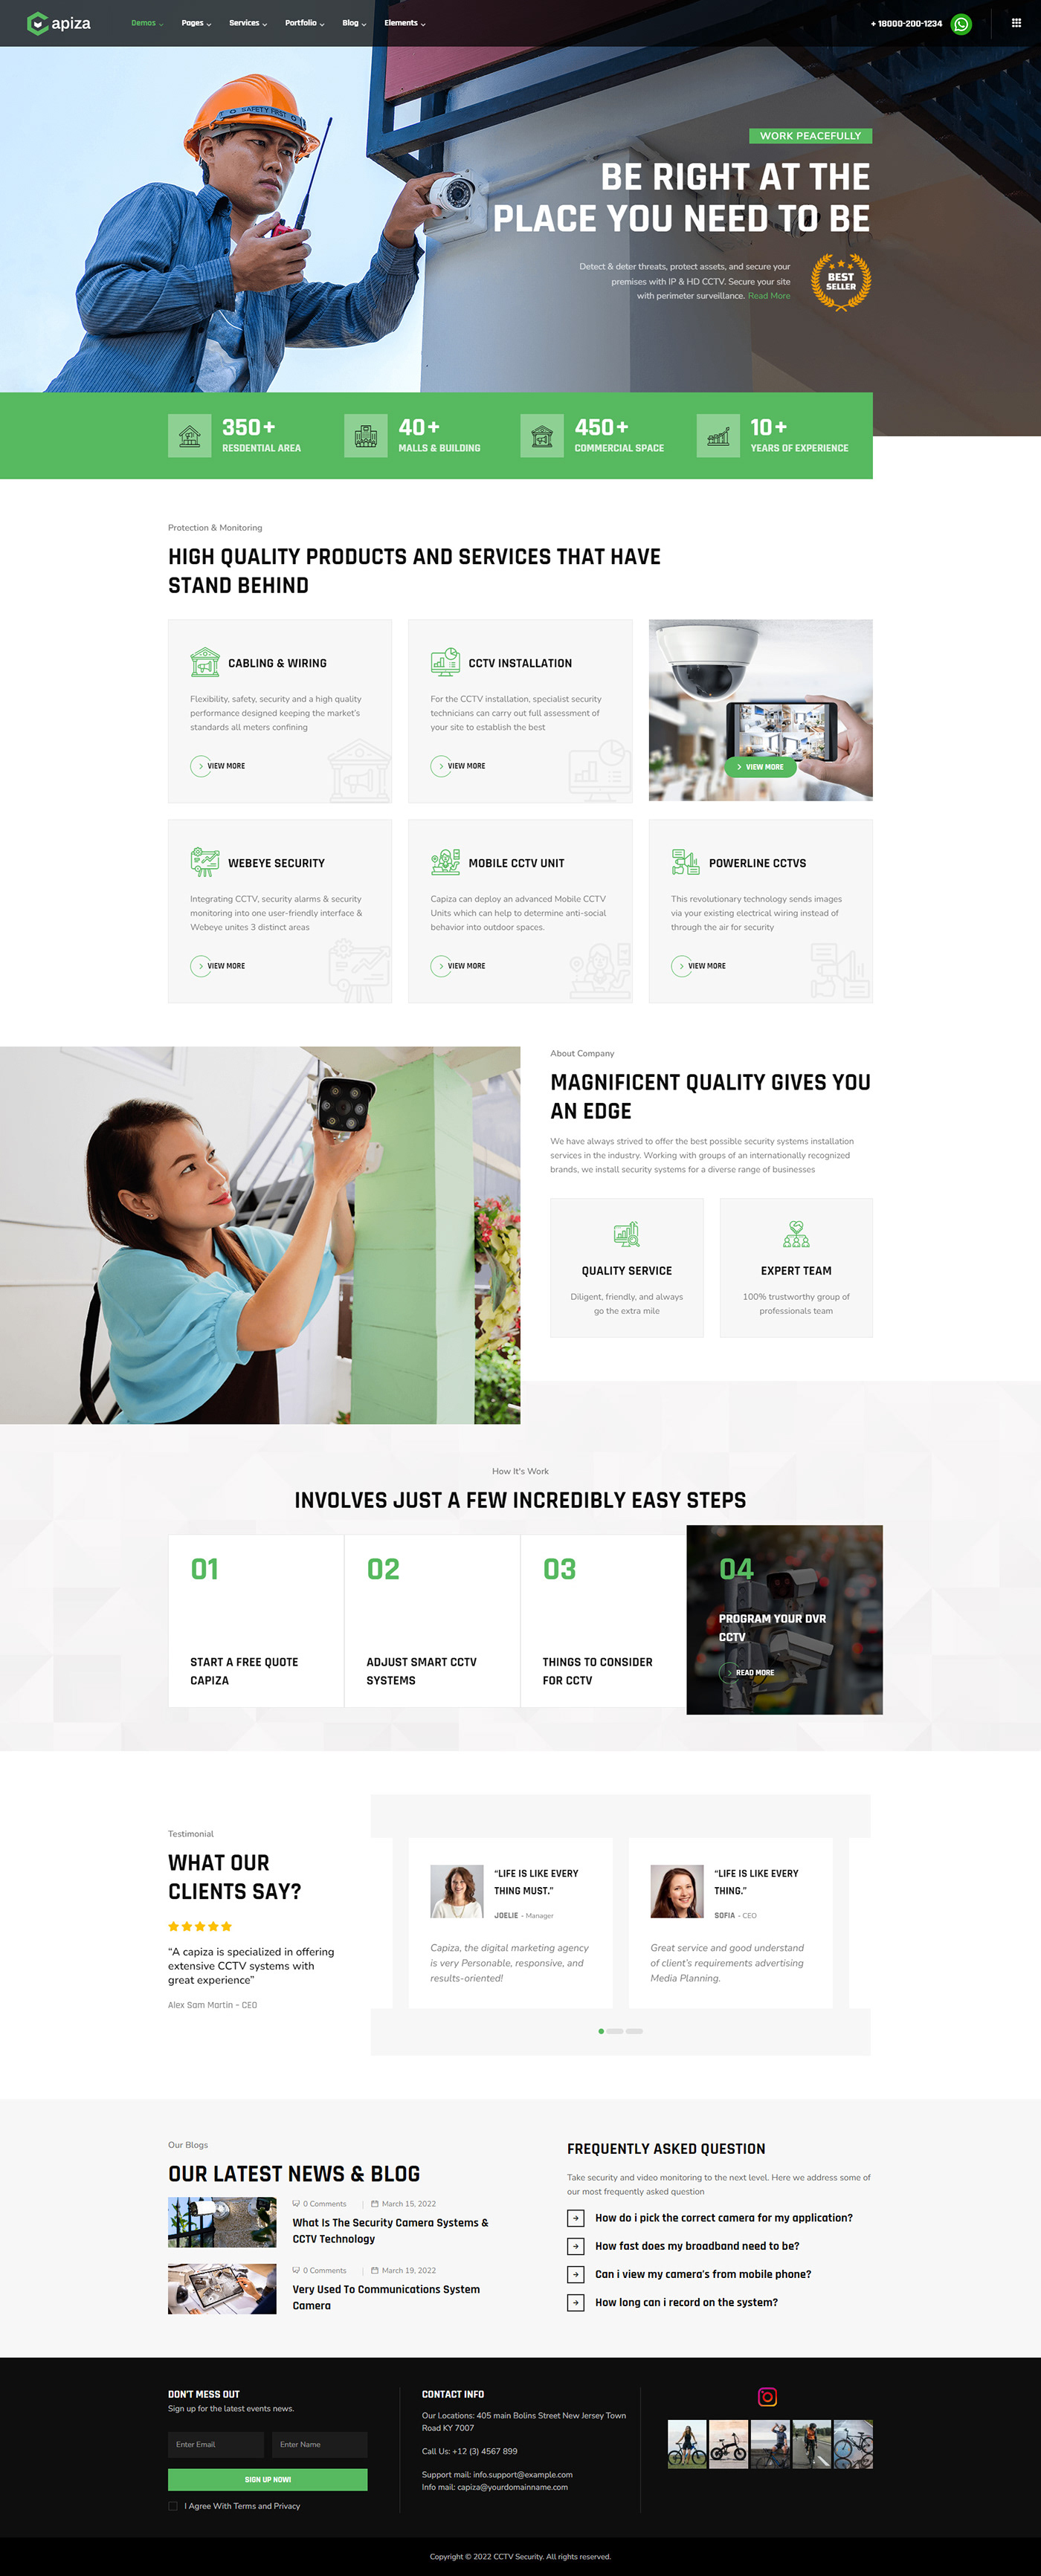 Capiza Classic  multipurpose WordPress theme for stunning web appearances in businesses.